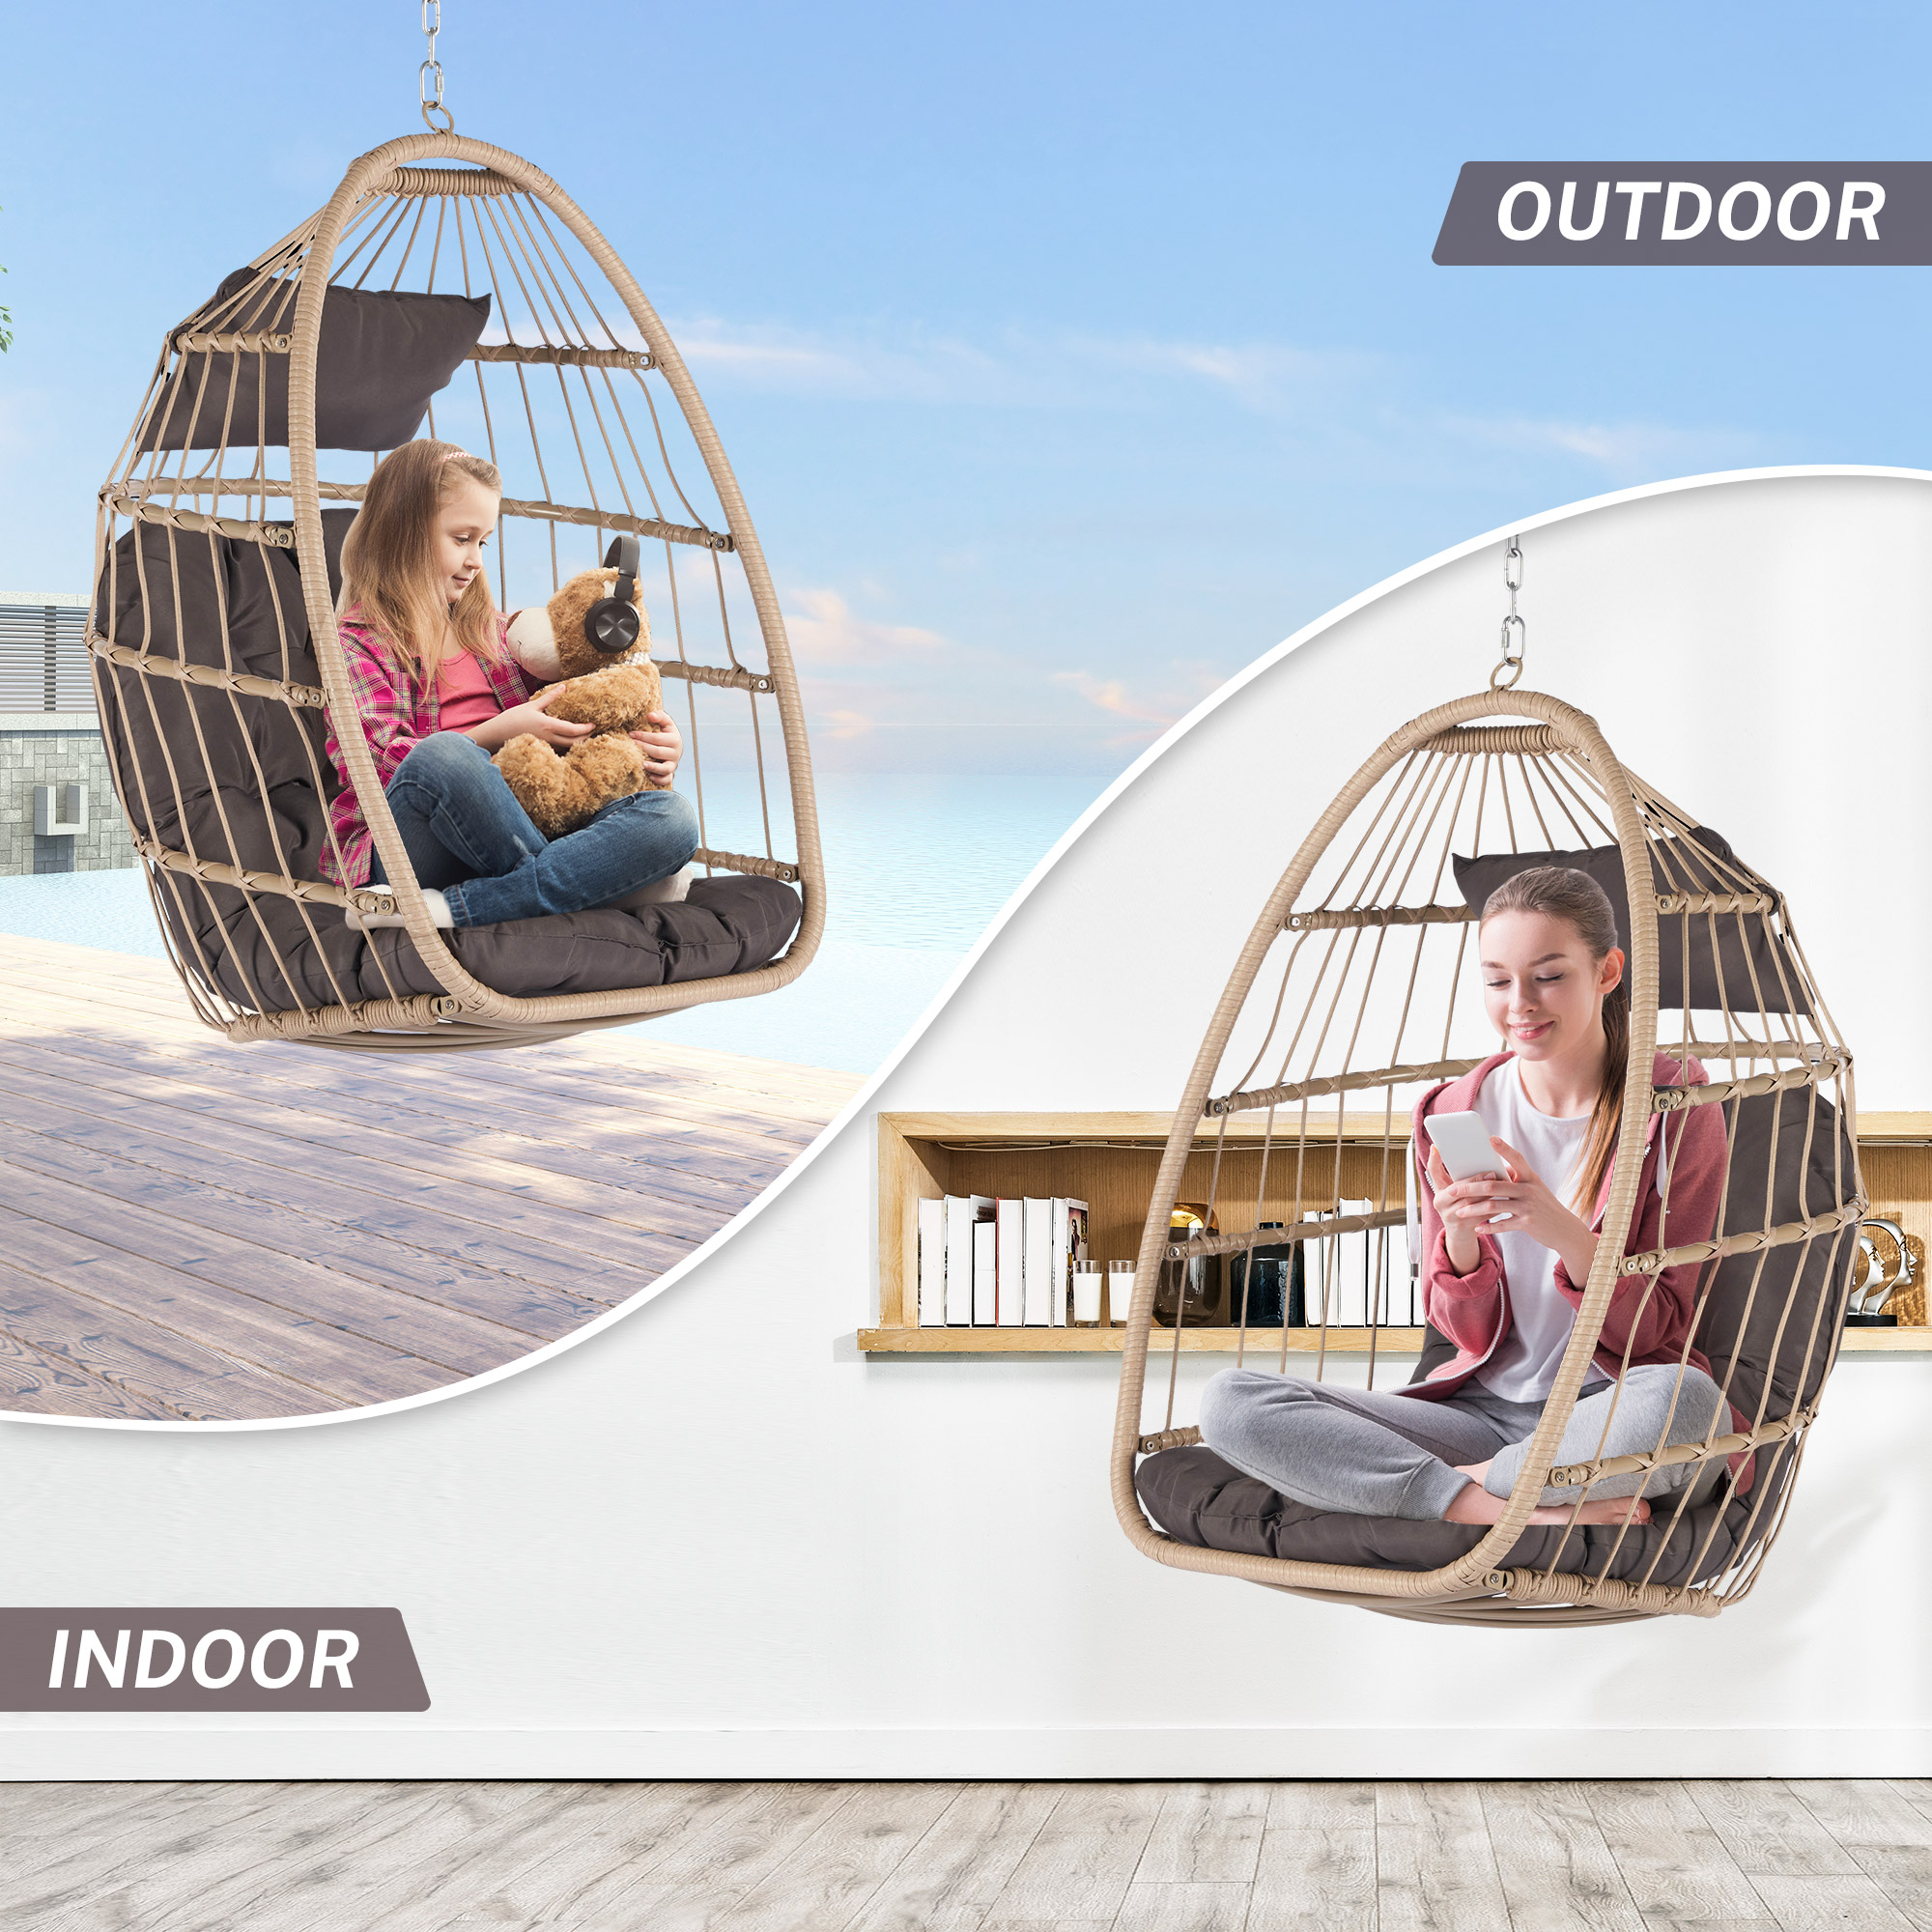 Egg Chair with Hanging Chains, SYNGAR Outdoor All Weather Wicker Hanging Hammock Chair with Dark Gray Cushions, Patio Foldable Basket Swing Chair, for Porch, Balcony, Backyard, Garden, Bedroom, D7708 - image 4 of 10